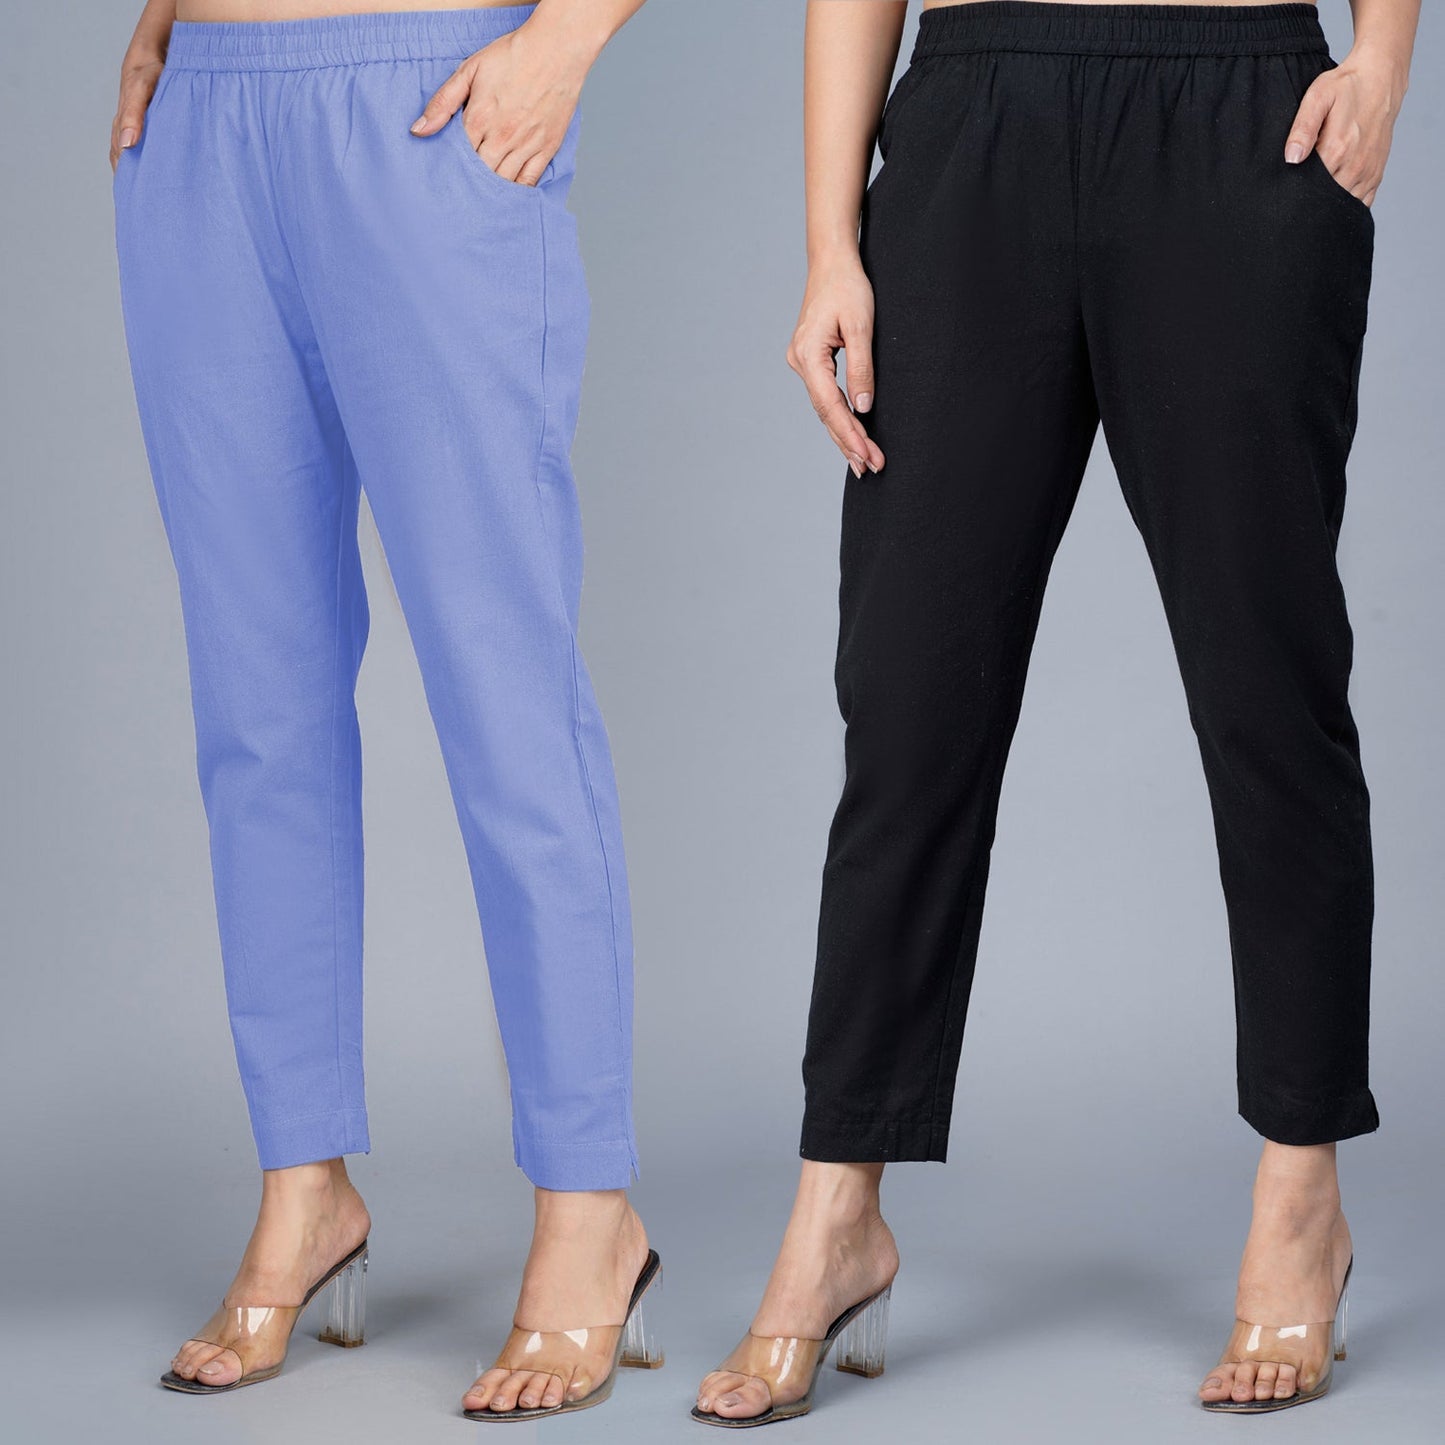 Pack Of 2 Womens Regular Fit Denim Blue And Black Fully Elastic Waistband Cotton Trouser